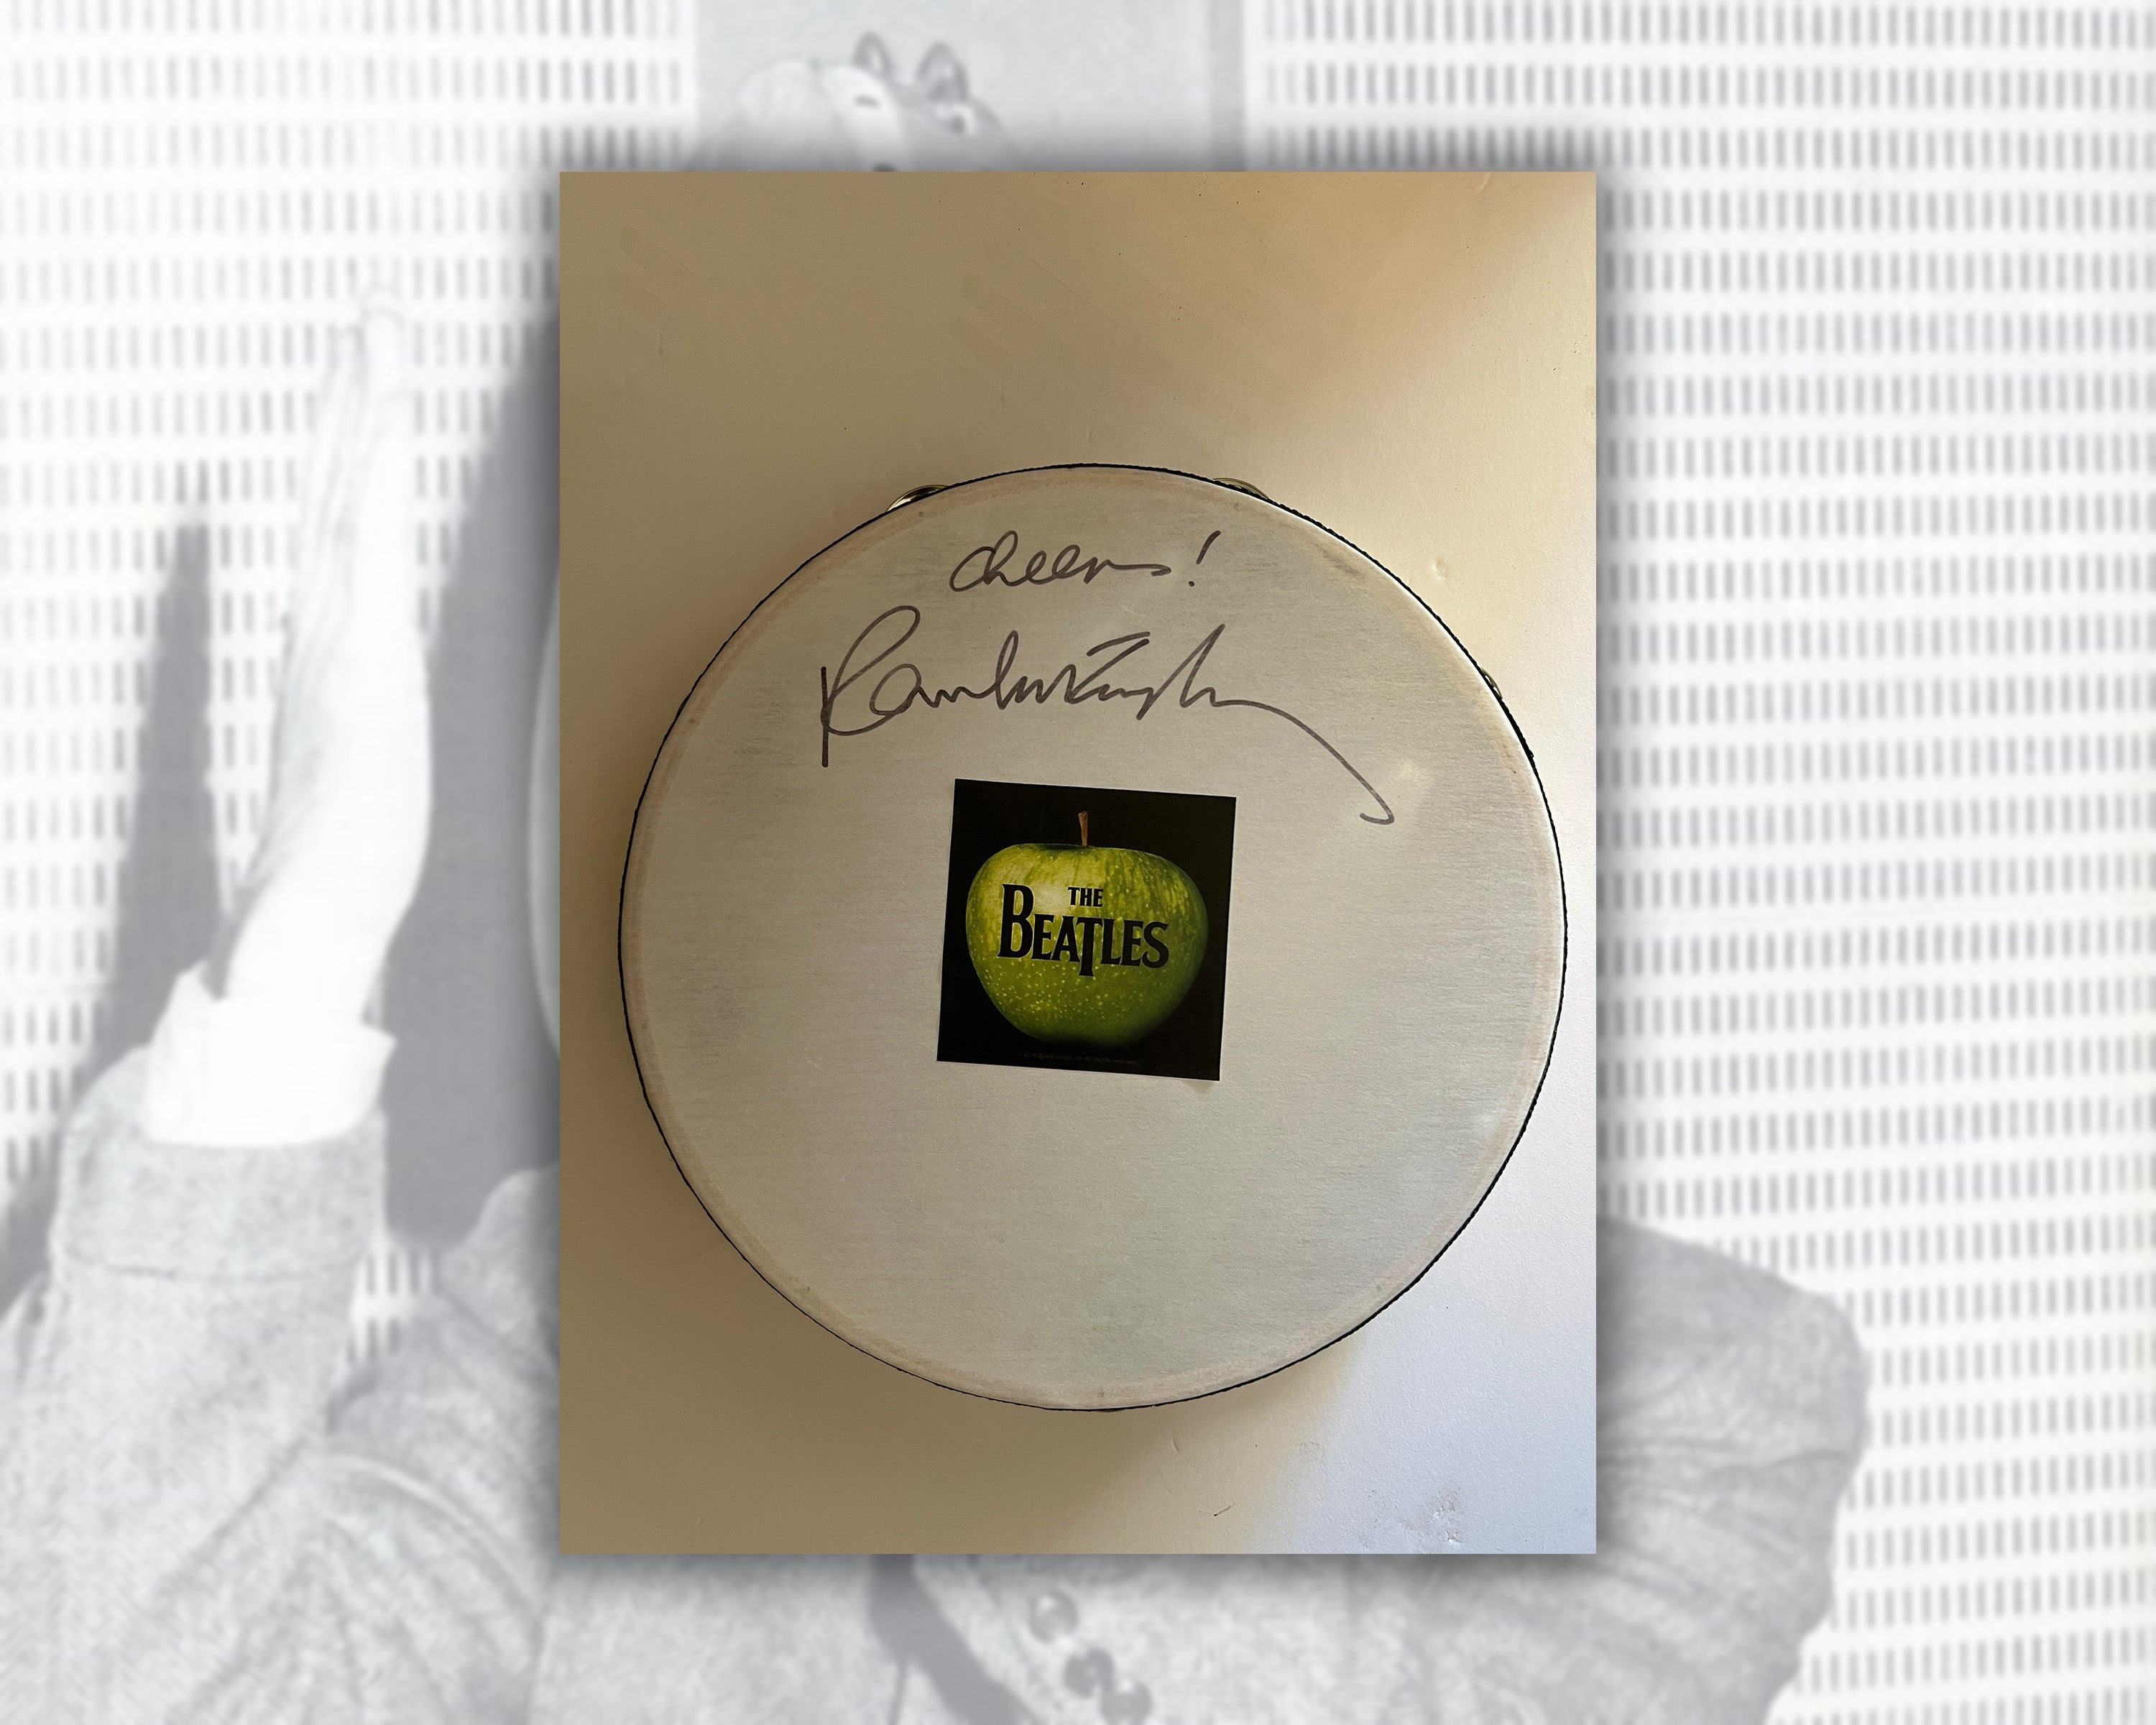 Paul McCartney The Beatles 14-inch tambourine signed with proof